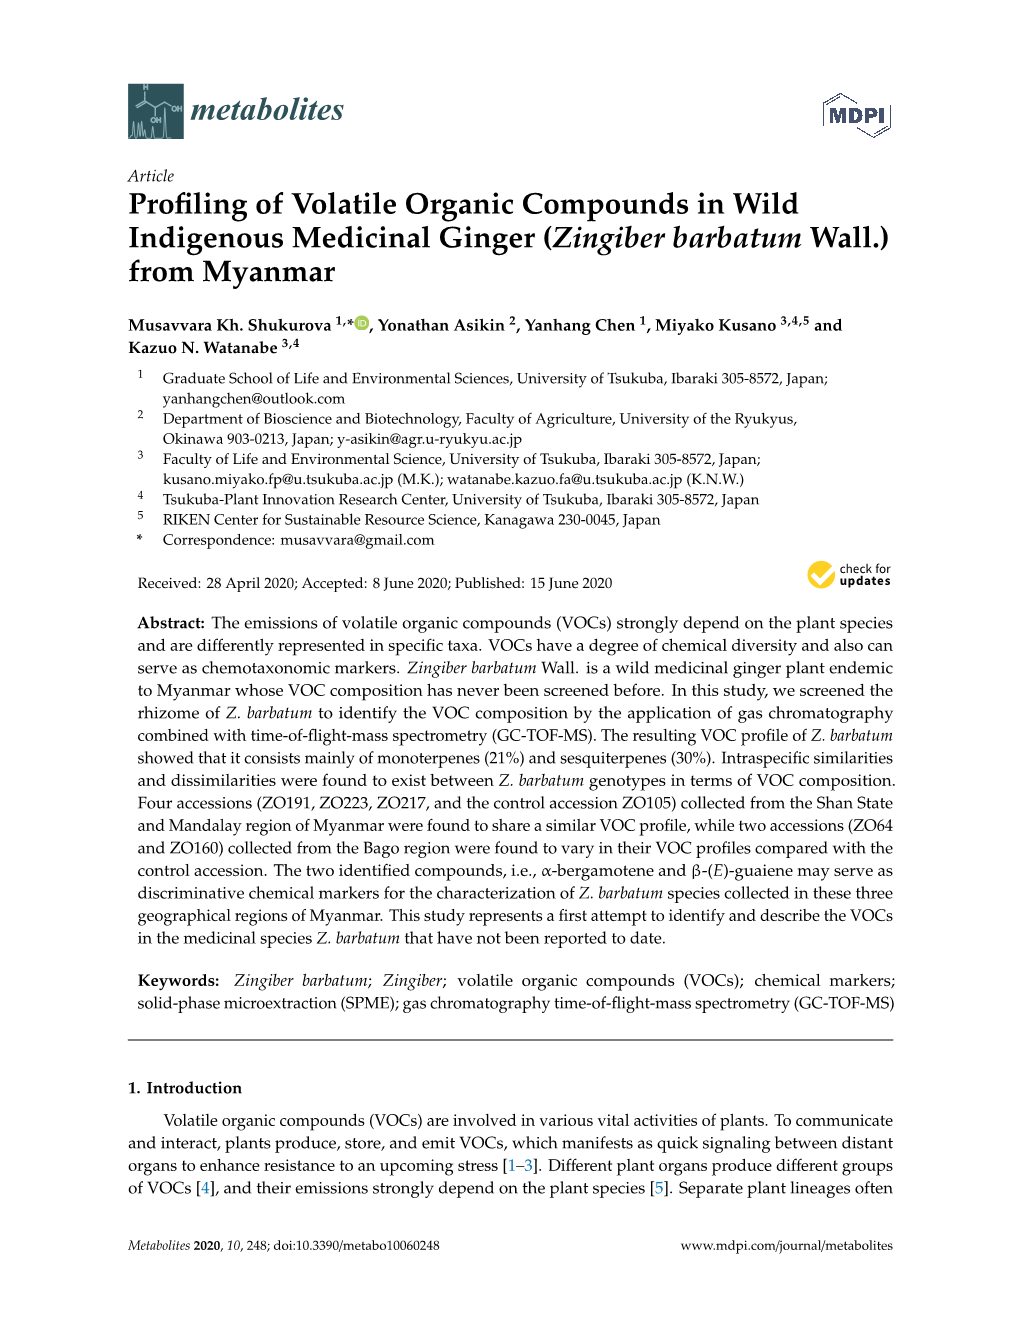 Profiling of Volatile Organic Compounds in Wild Indigenous